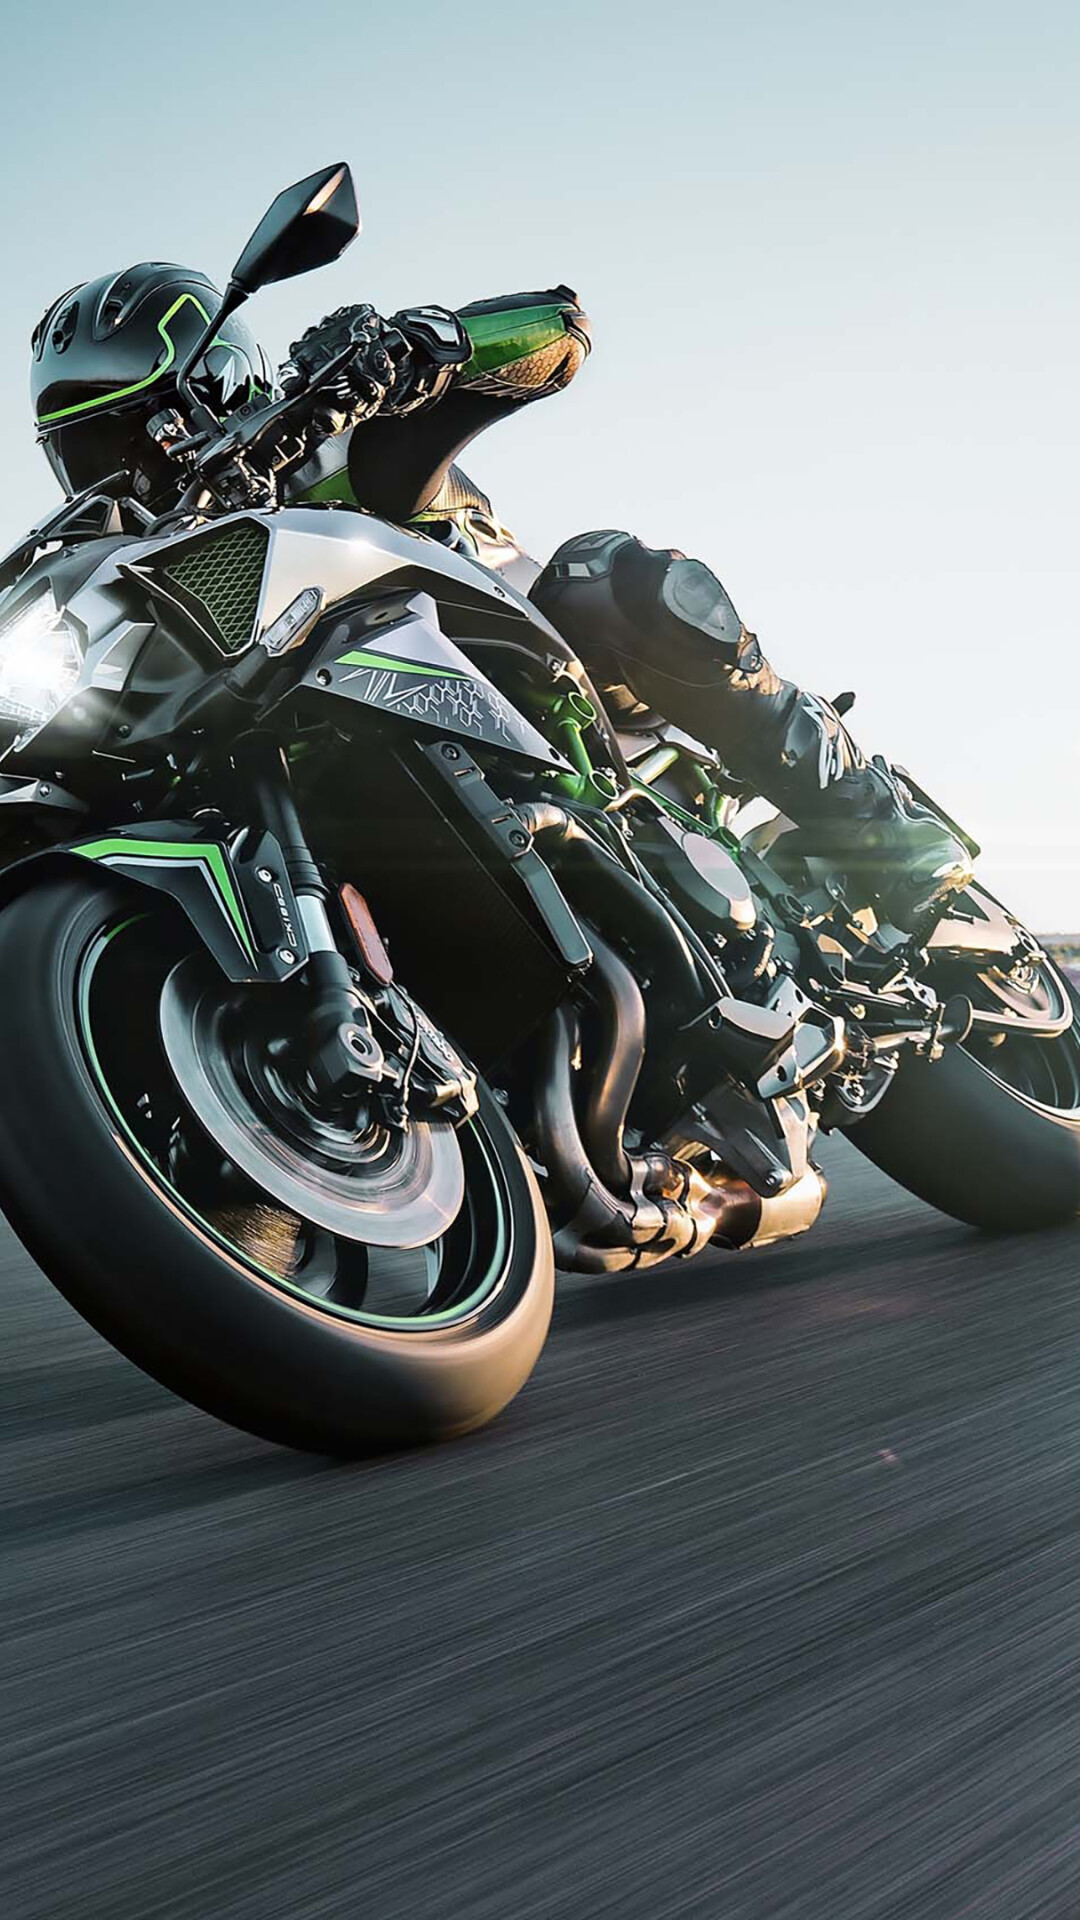 Kawasaki: The company initially manufactured motorcycles under the Meguro name. 1080x1920 Full HD Wallpaper.